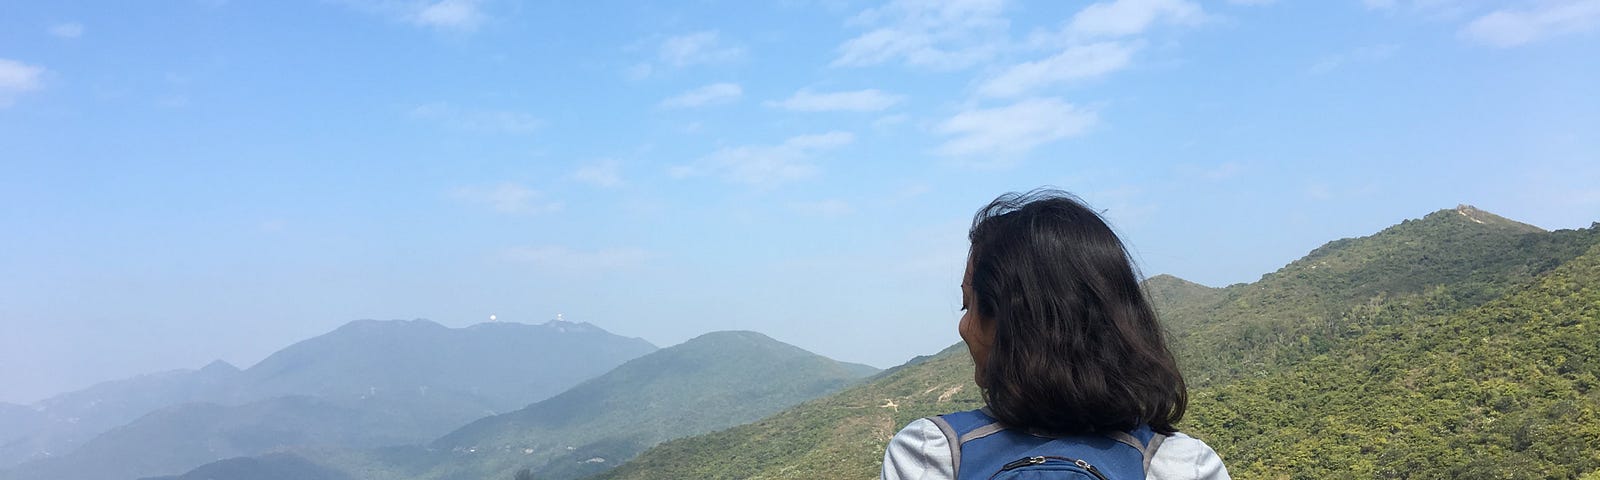 A woman with short dark brown hair is shown from behind. She wears a gray long-sleeved top and blue backpack. She stands in front of a verdant hill, with mountains visible in the distance through haze.